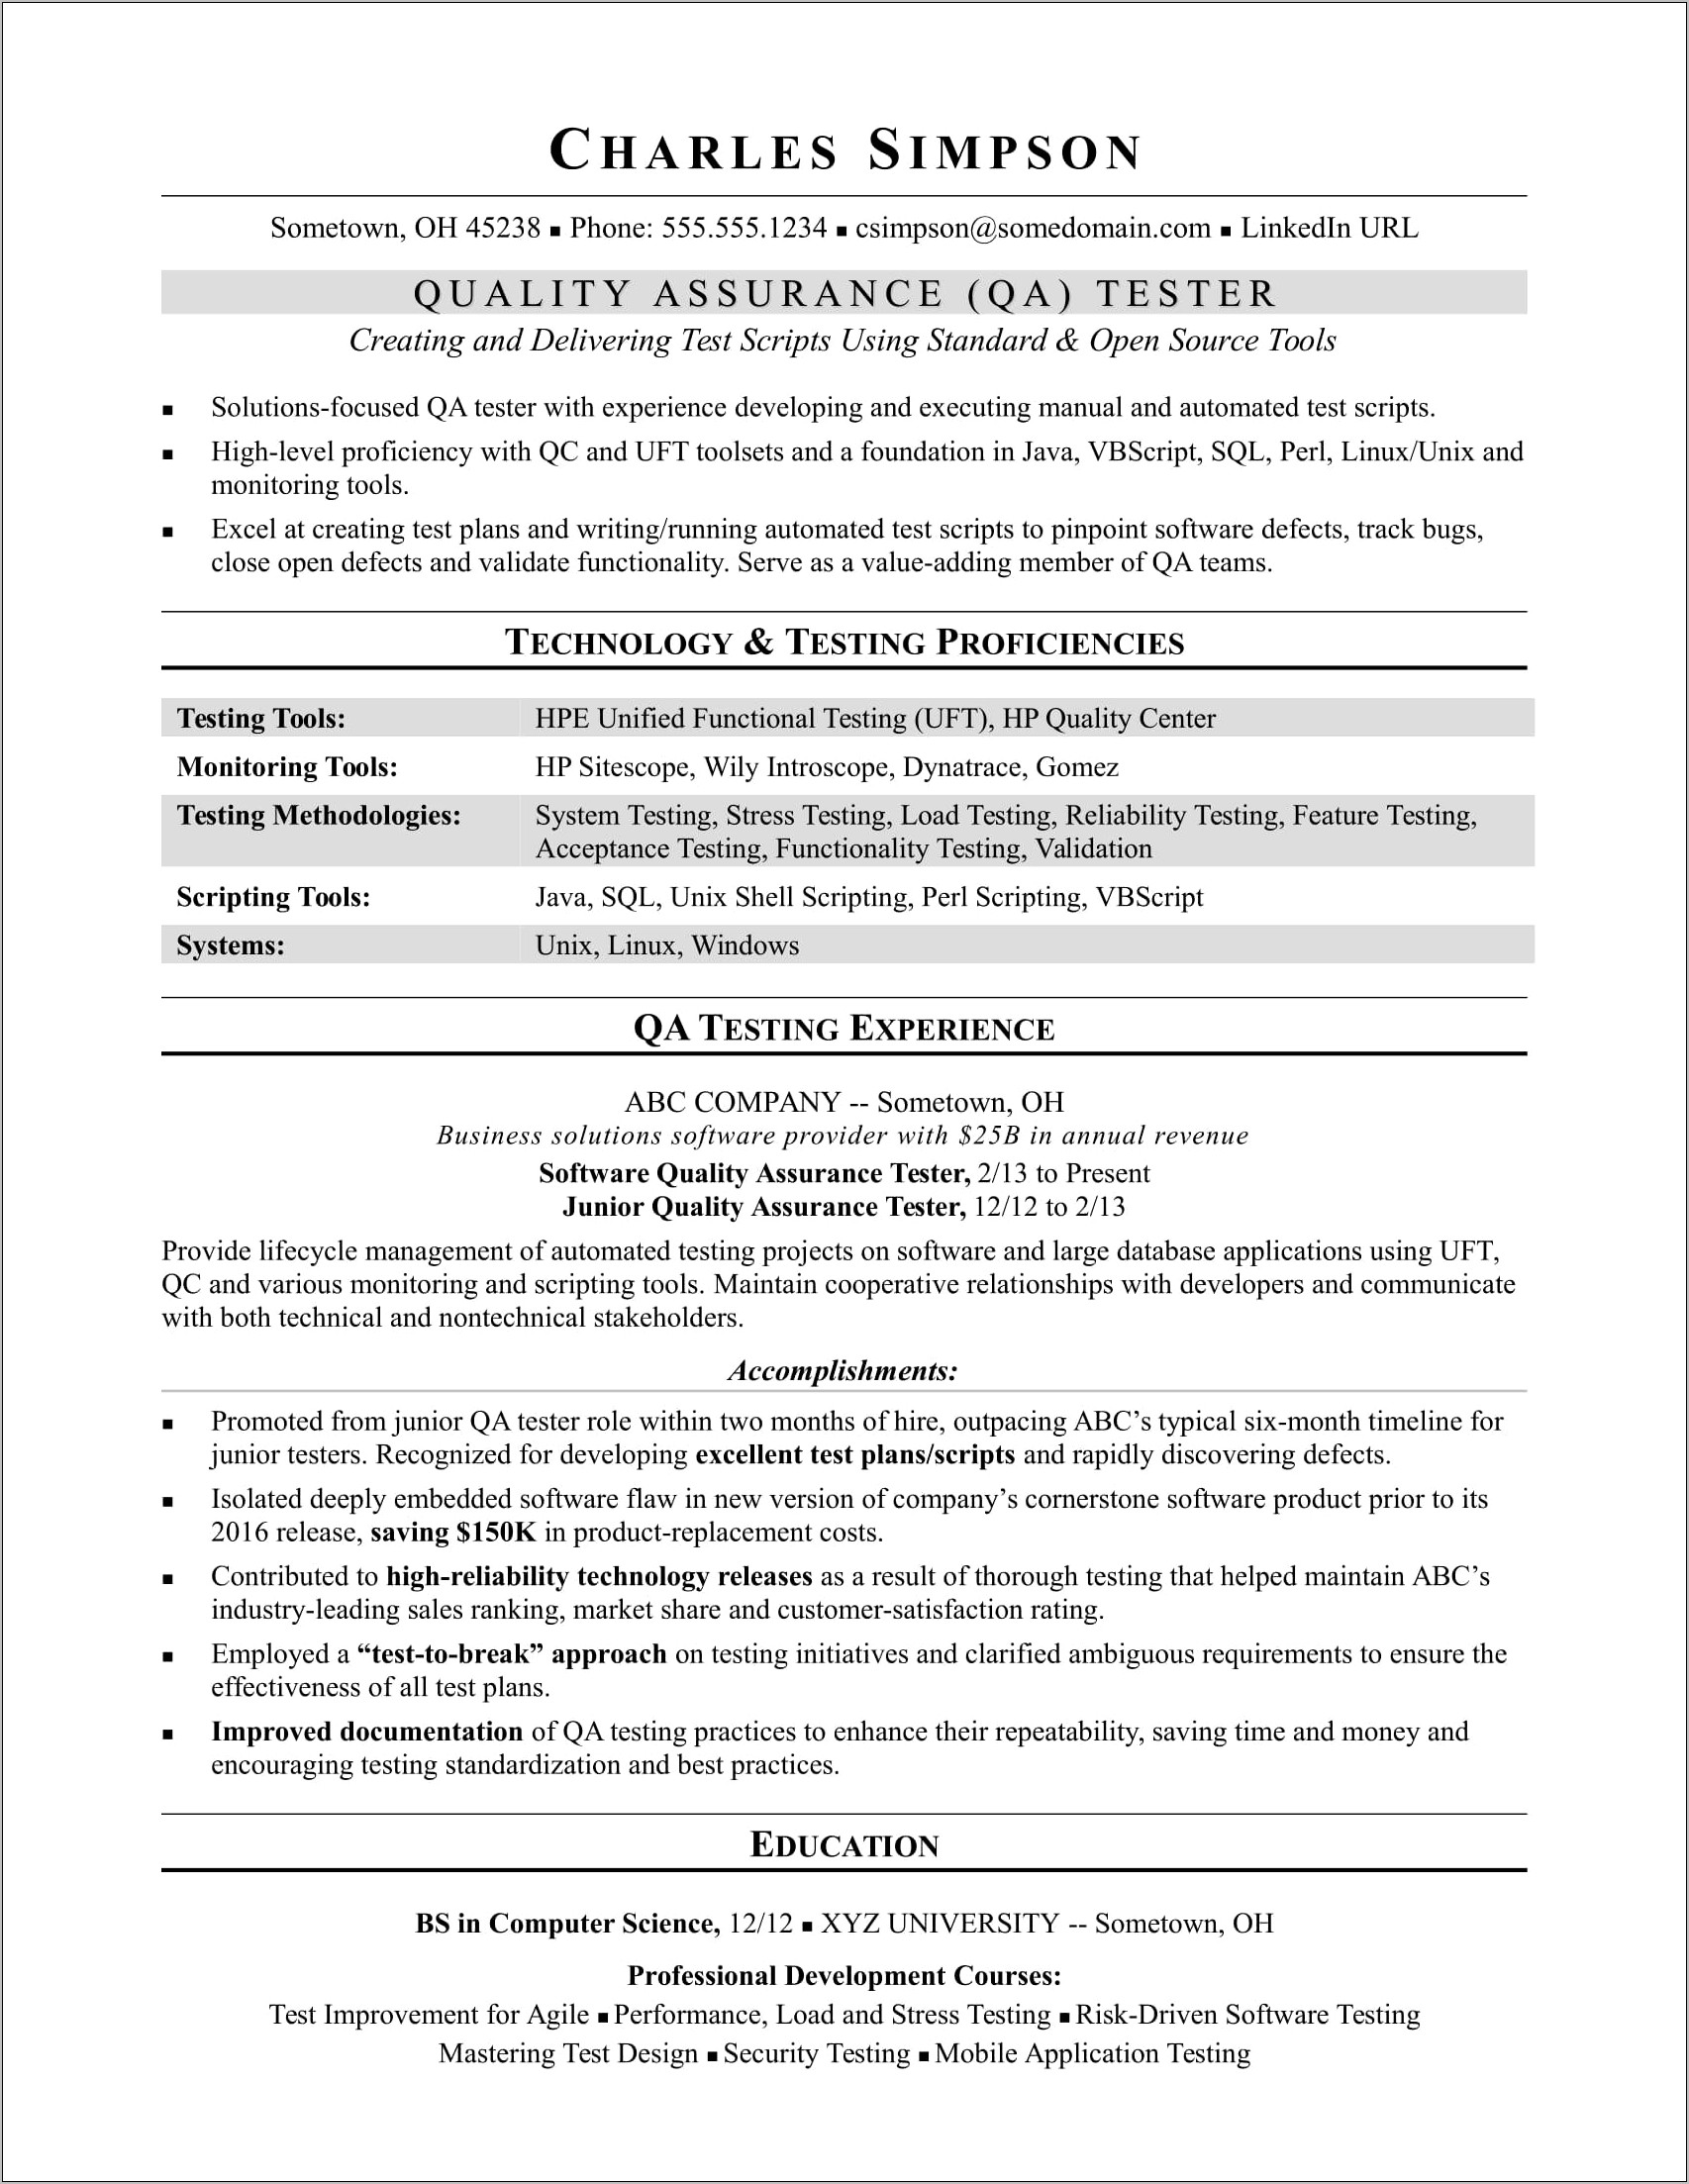 Qa Analyst With Workforce Experience Resume